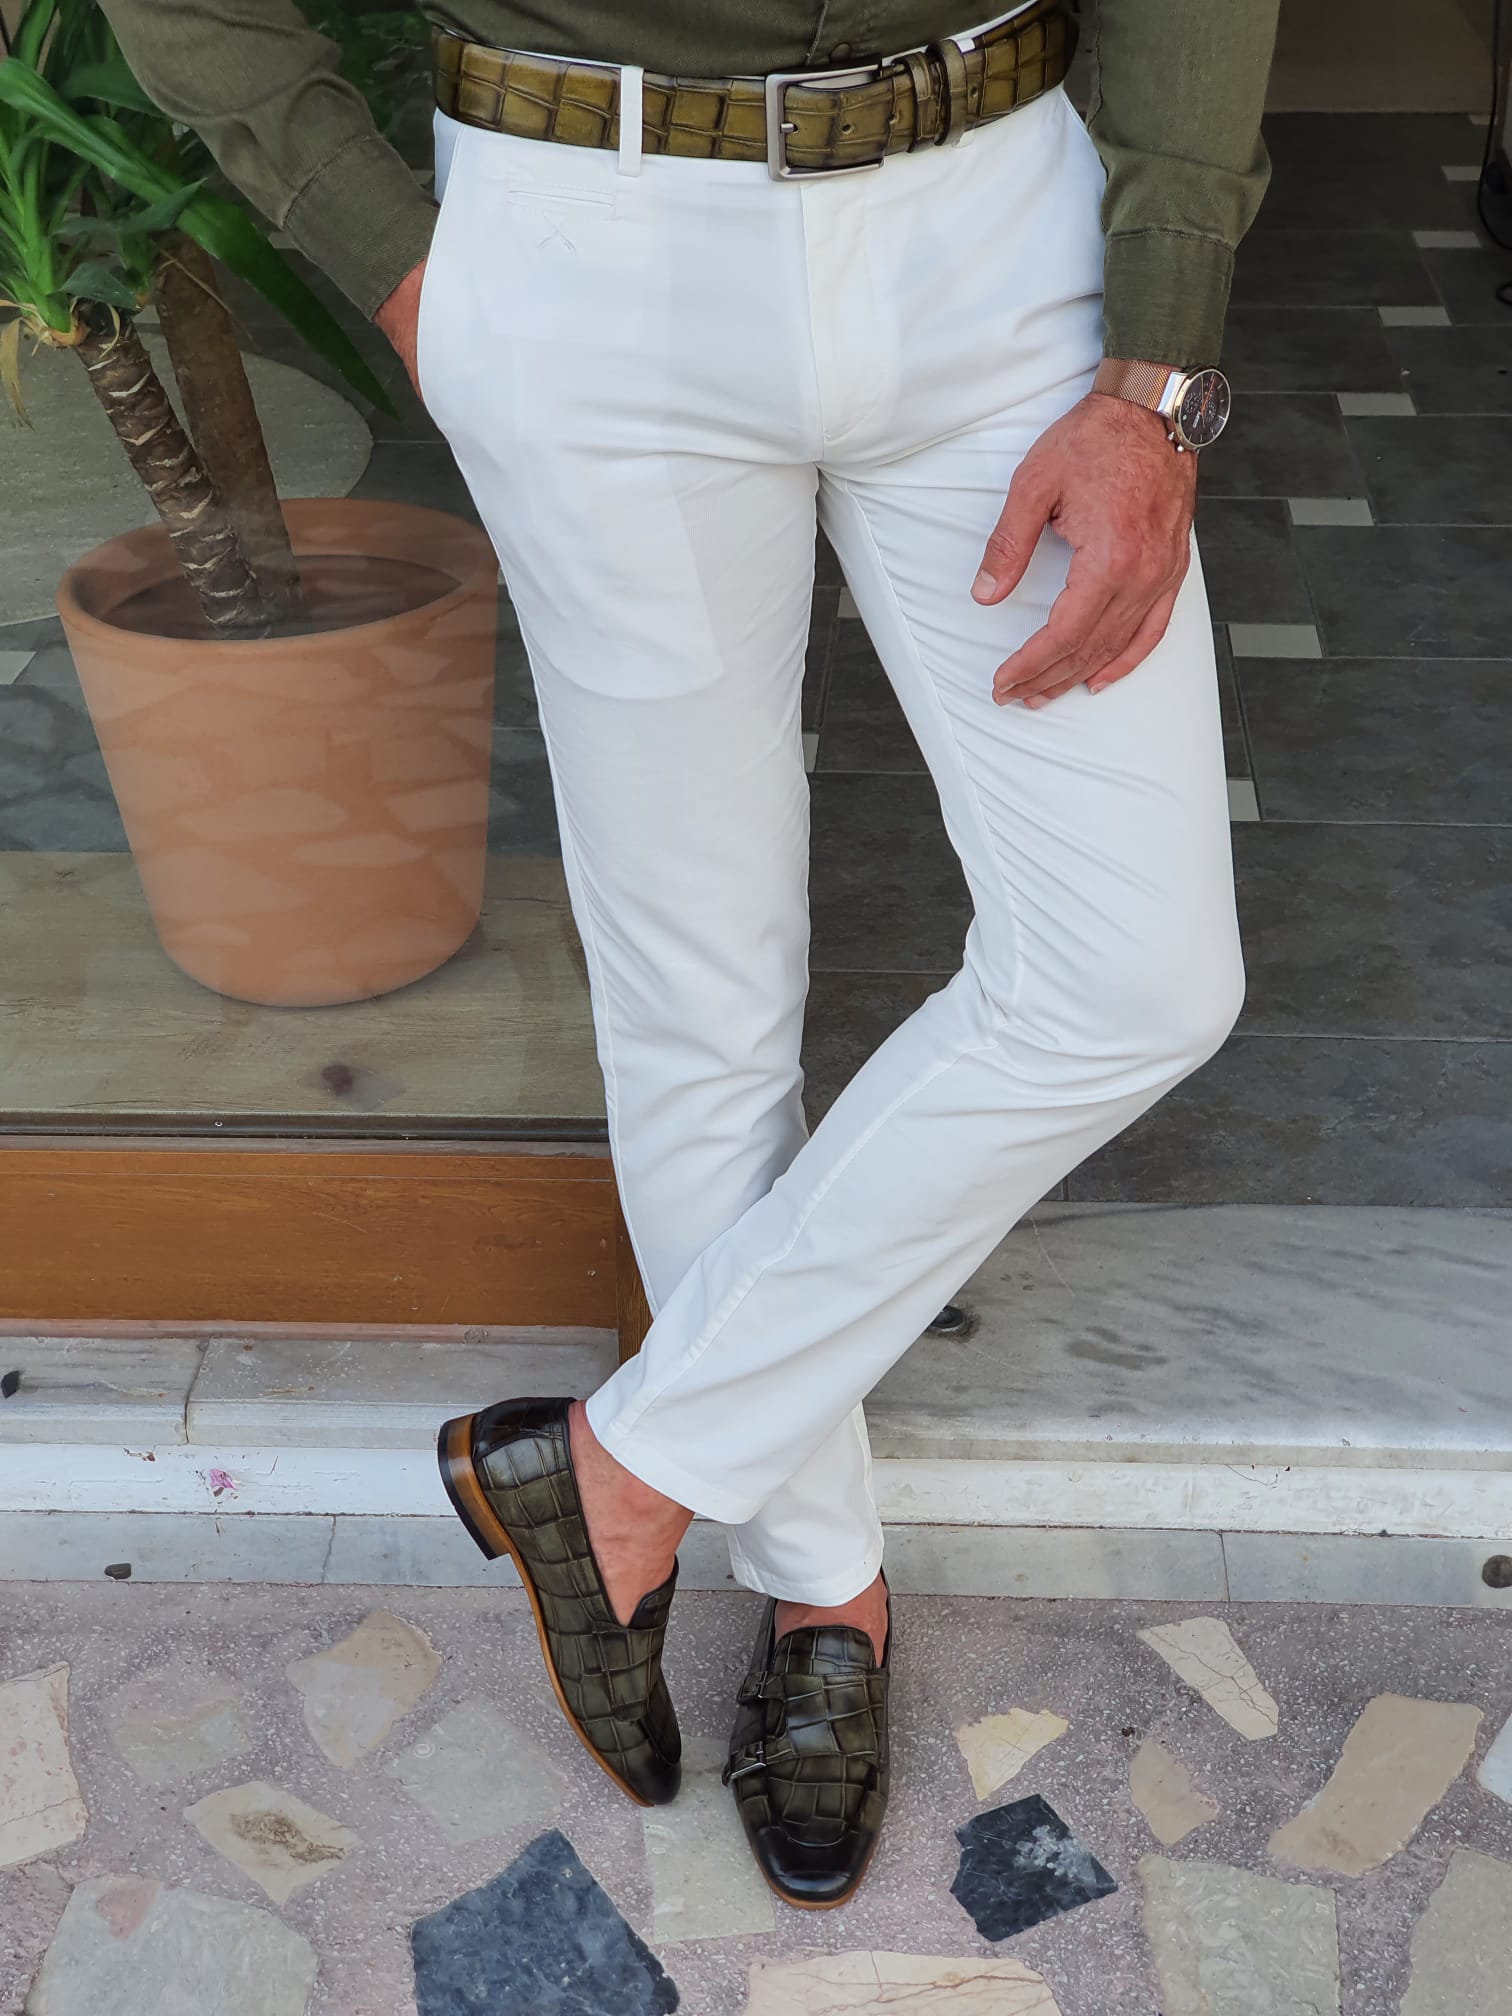 Tailored Matte White Linen Trousers | Buy Online at Moss